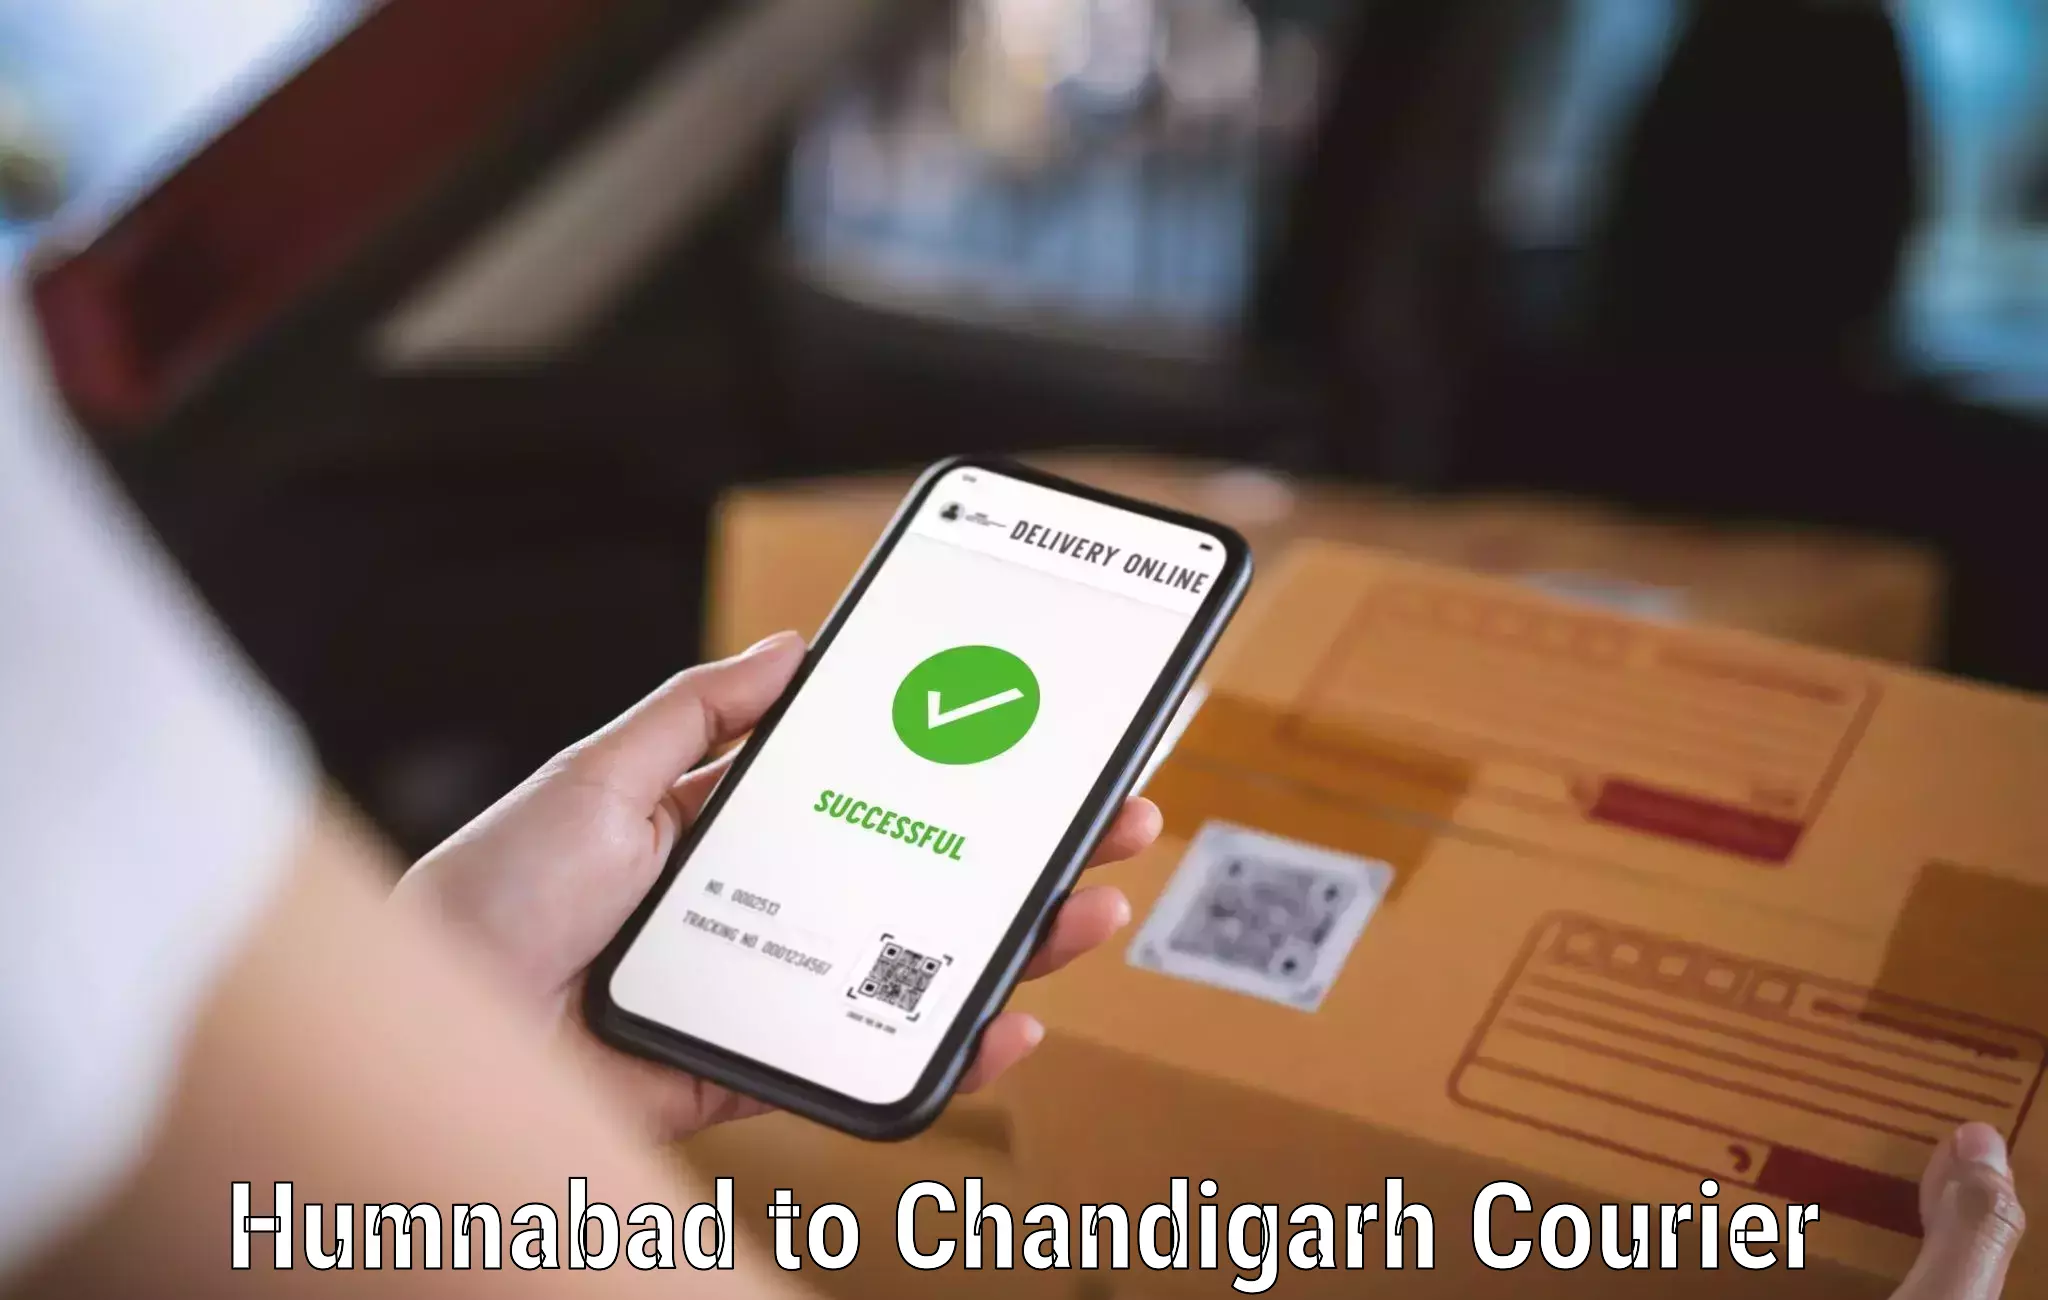 Business delivery service Humnabad to Chandigarh